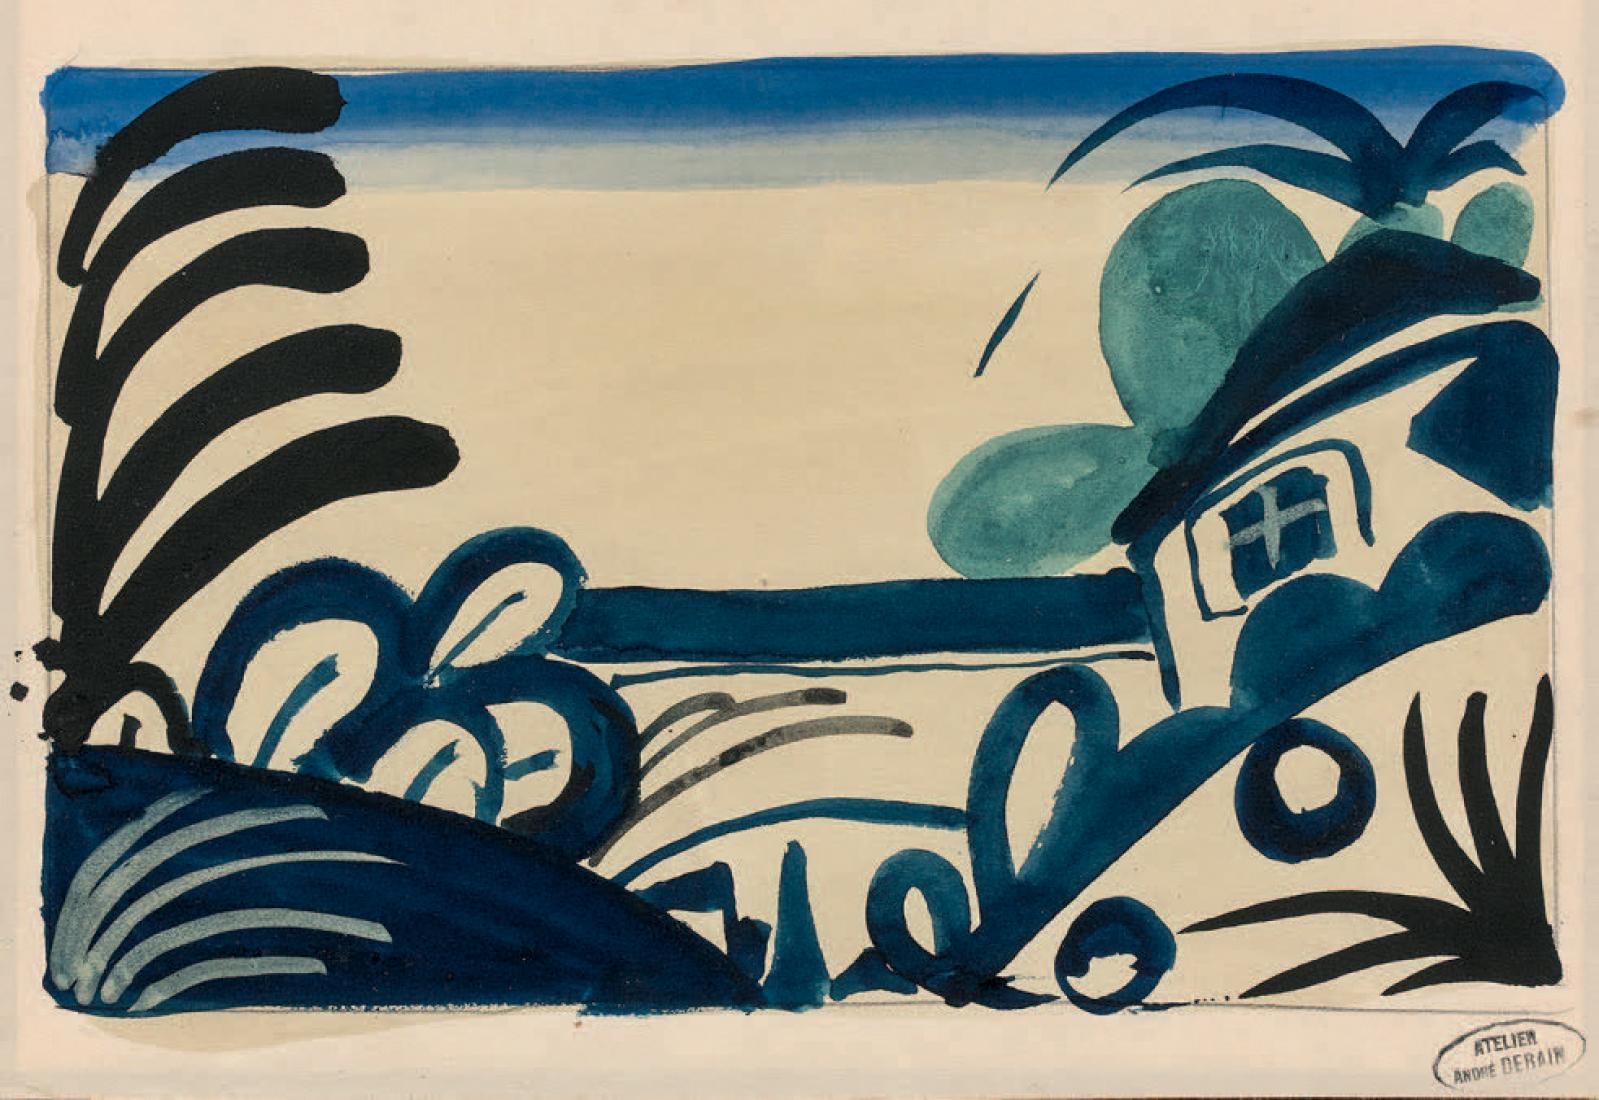 Artwork by André Derain, Landscape at home, Made of Watercolour gouache